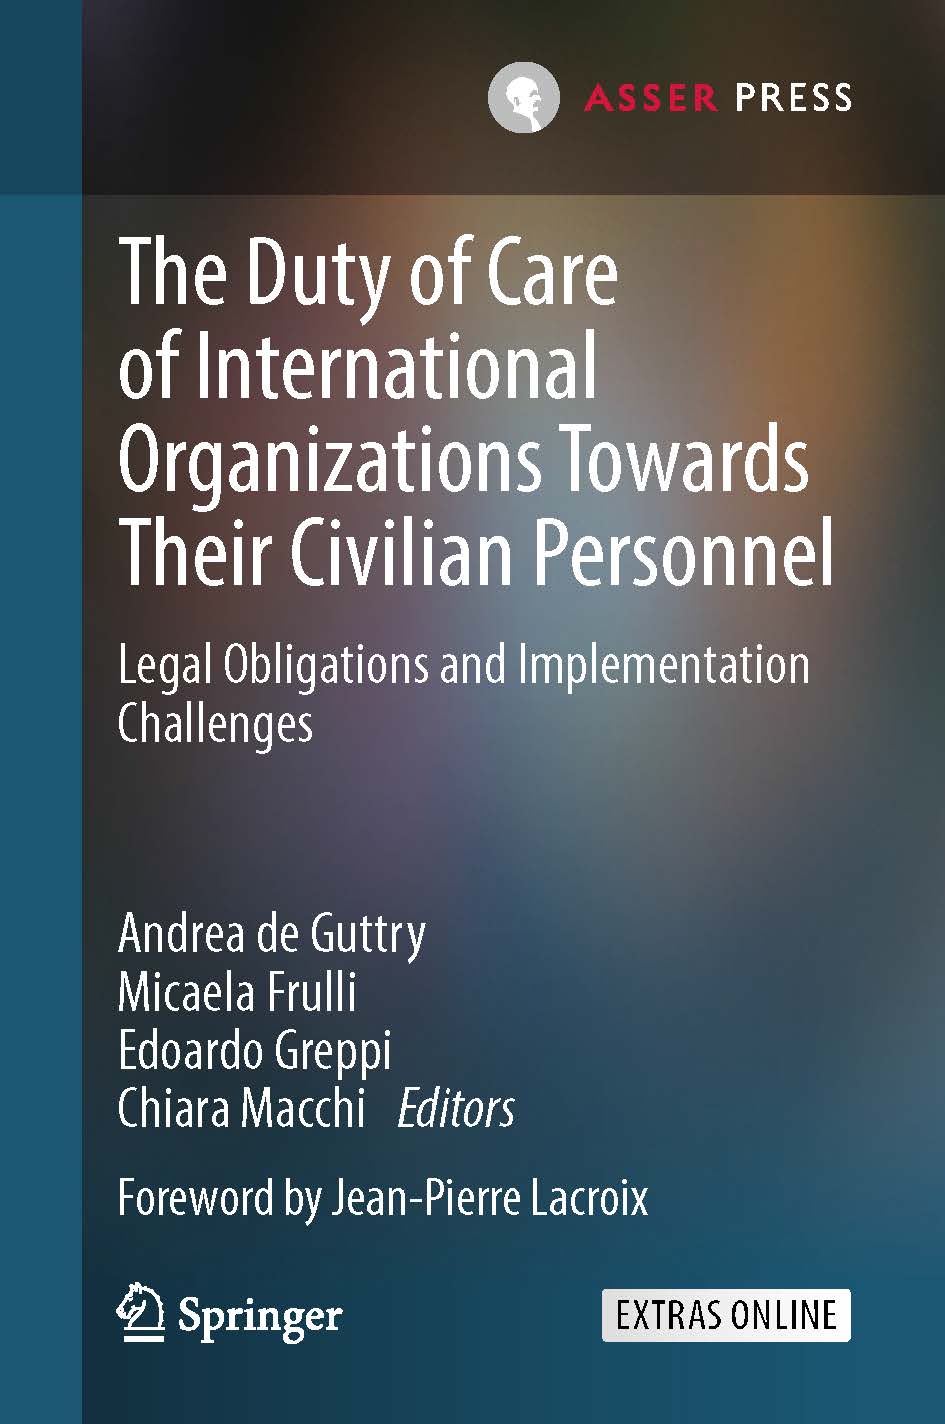 The Duty of Care of International Organizations Towards Their Civilian Personnel - Legal Obligations and Implementation Challenges